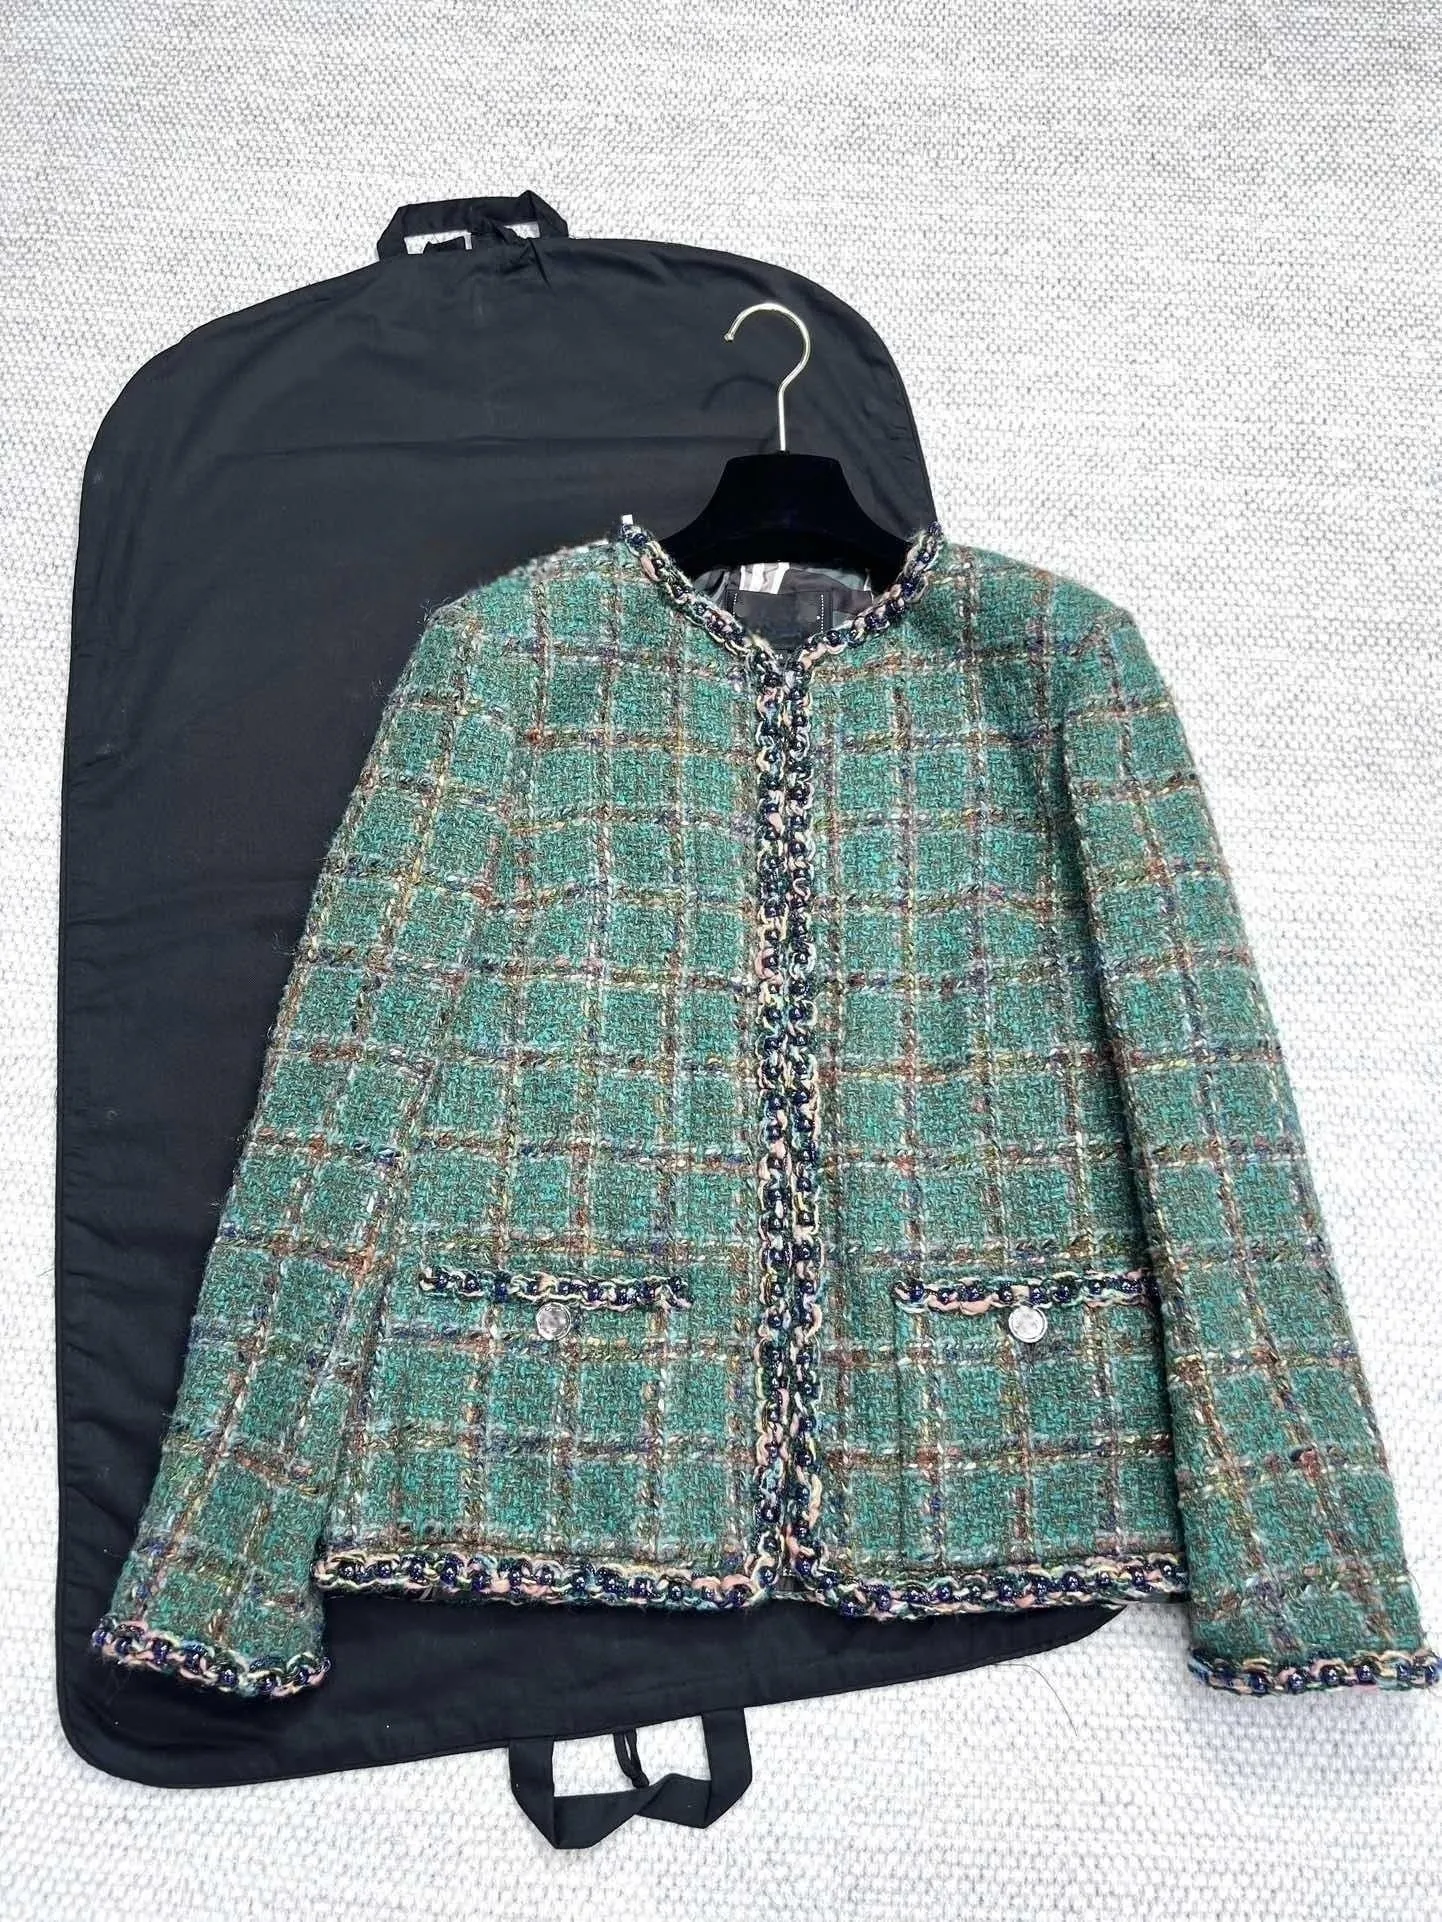 

100% Mulberry Silk Jacquard Lined With G-Dragon's Same Tweed Wool Green Check Hand-woven Coat